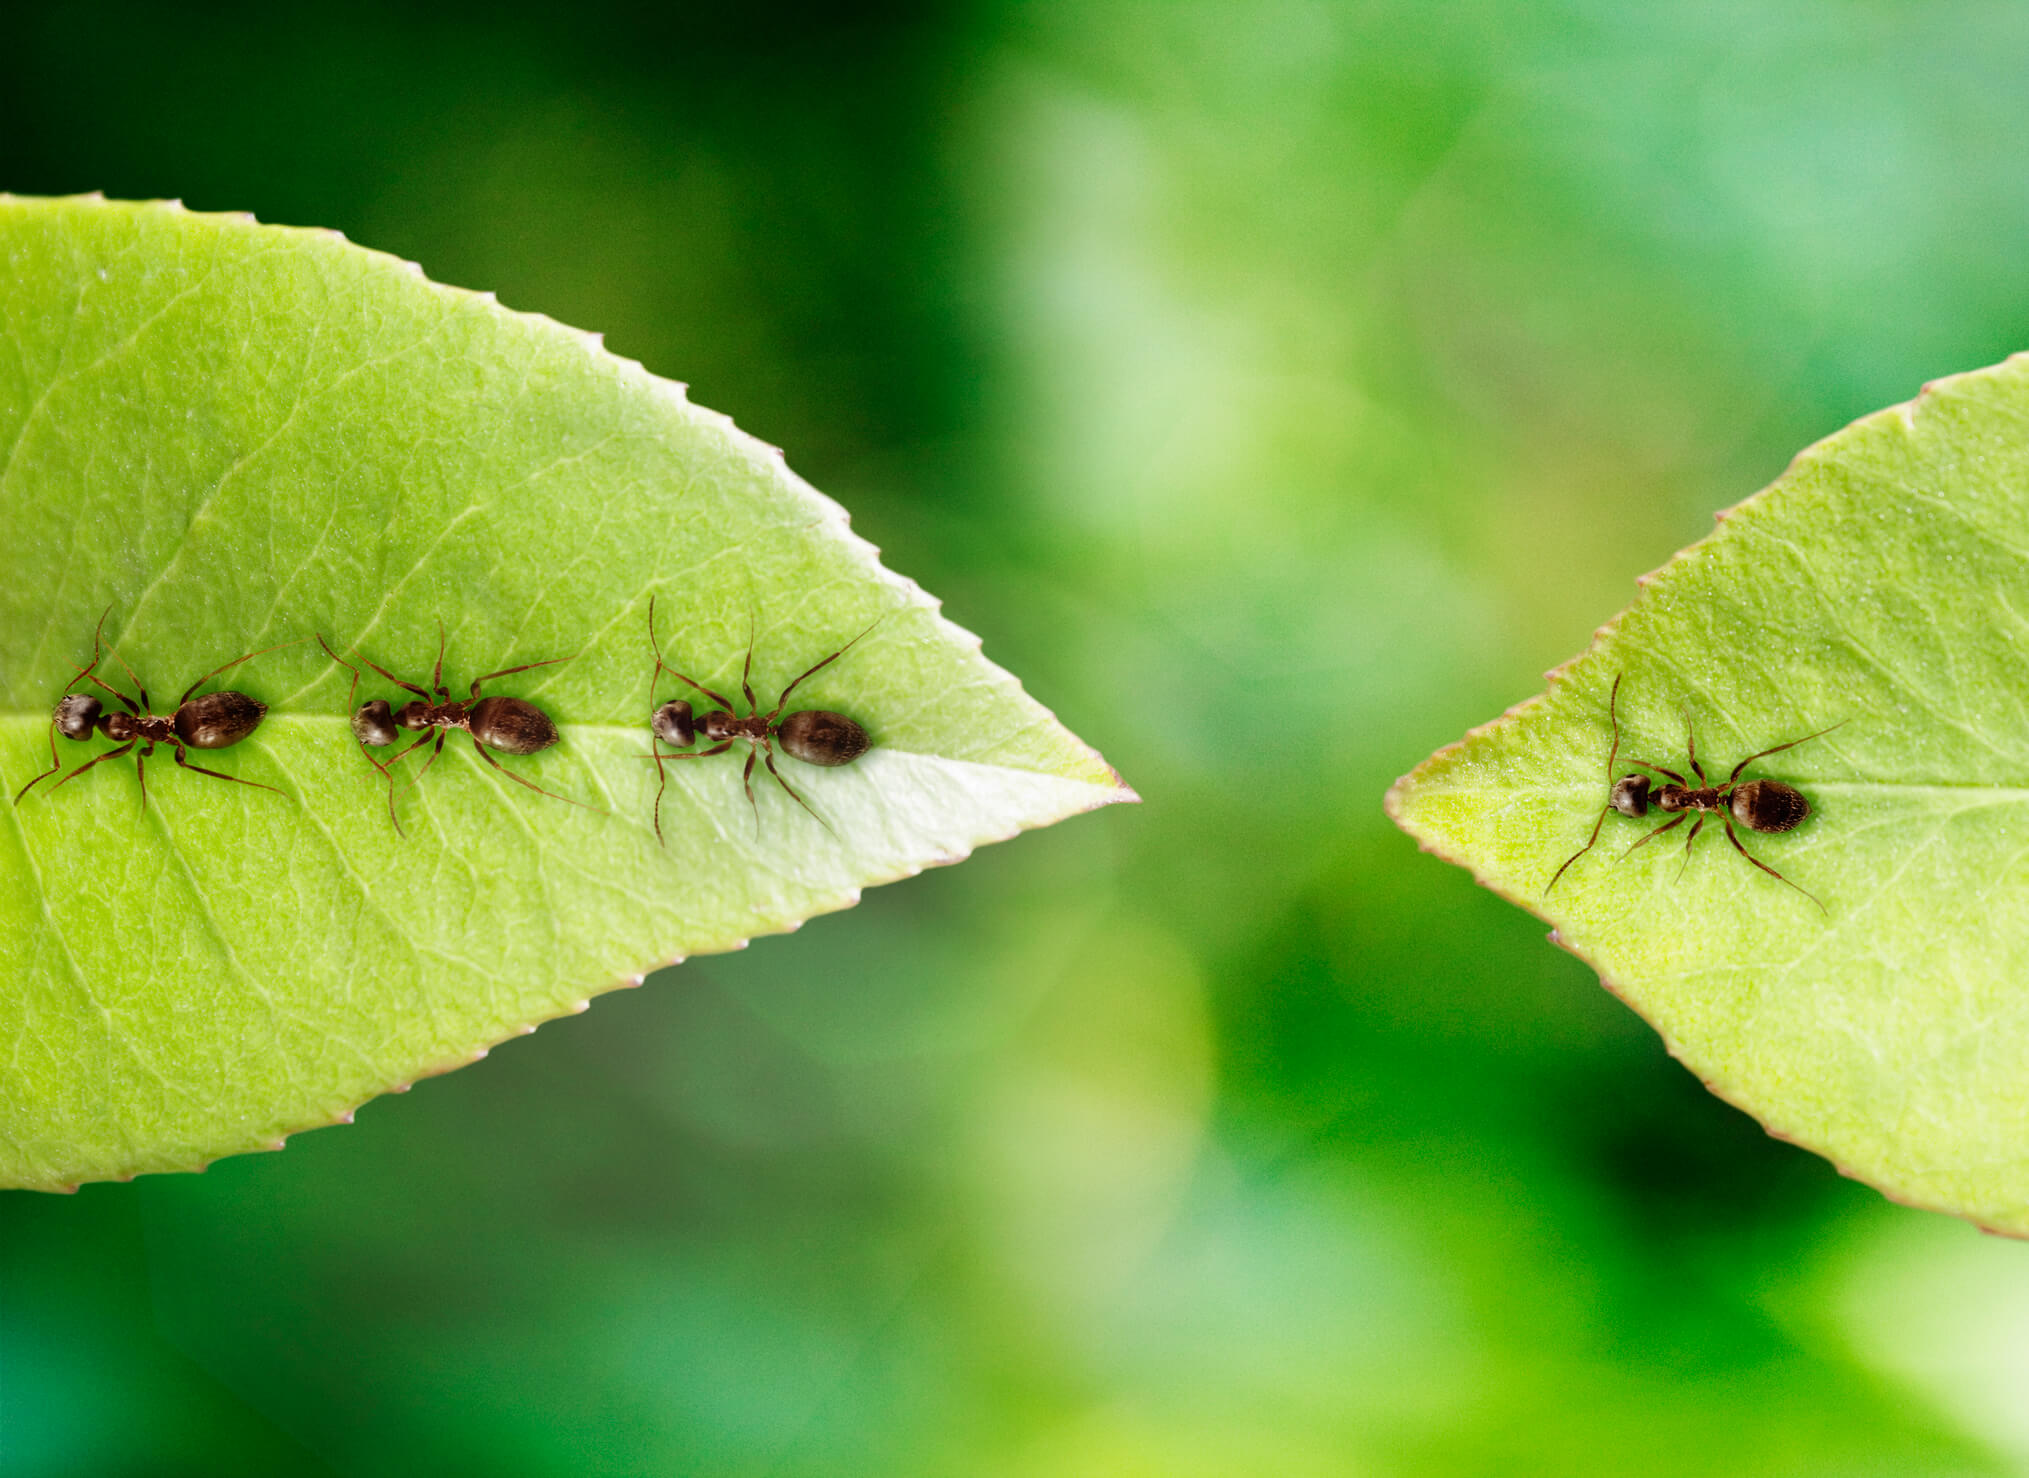 Disaster Recovery Plans - ants on green leaves